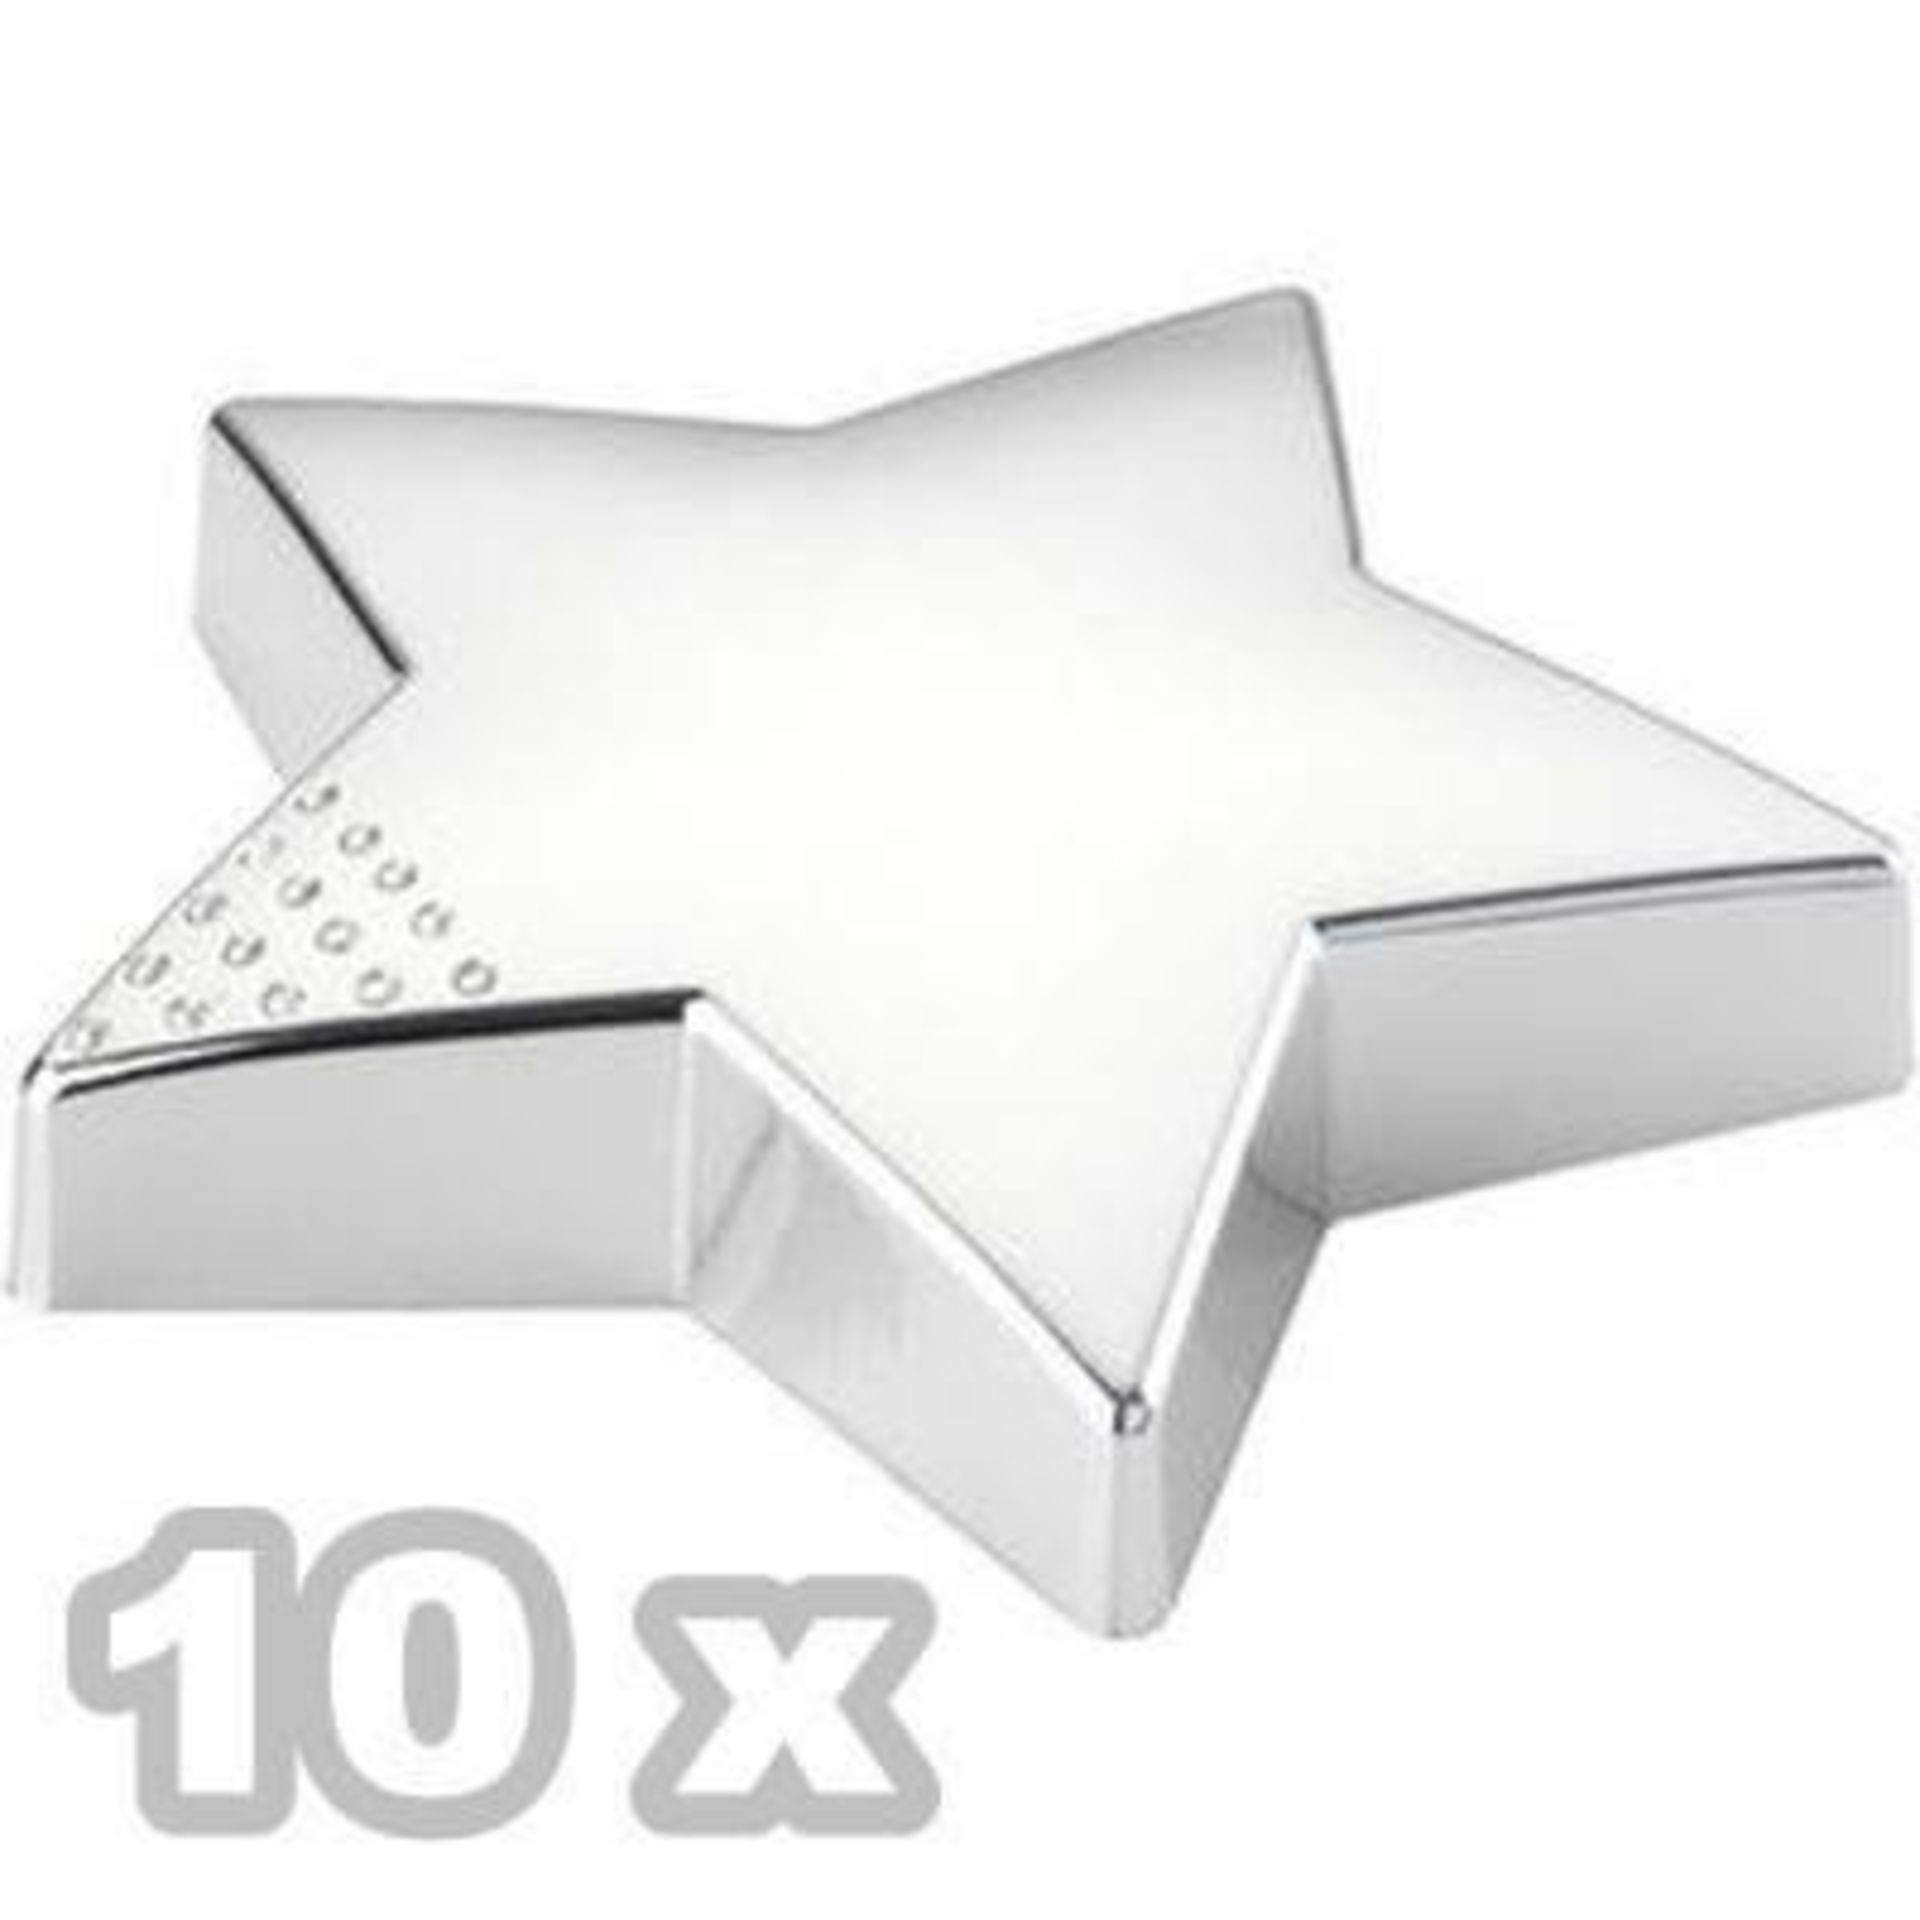 10 x Ice London Luxury Silver-Plated Paperweights - Made With Swarovski Elements - Brand New & Seale